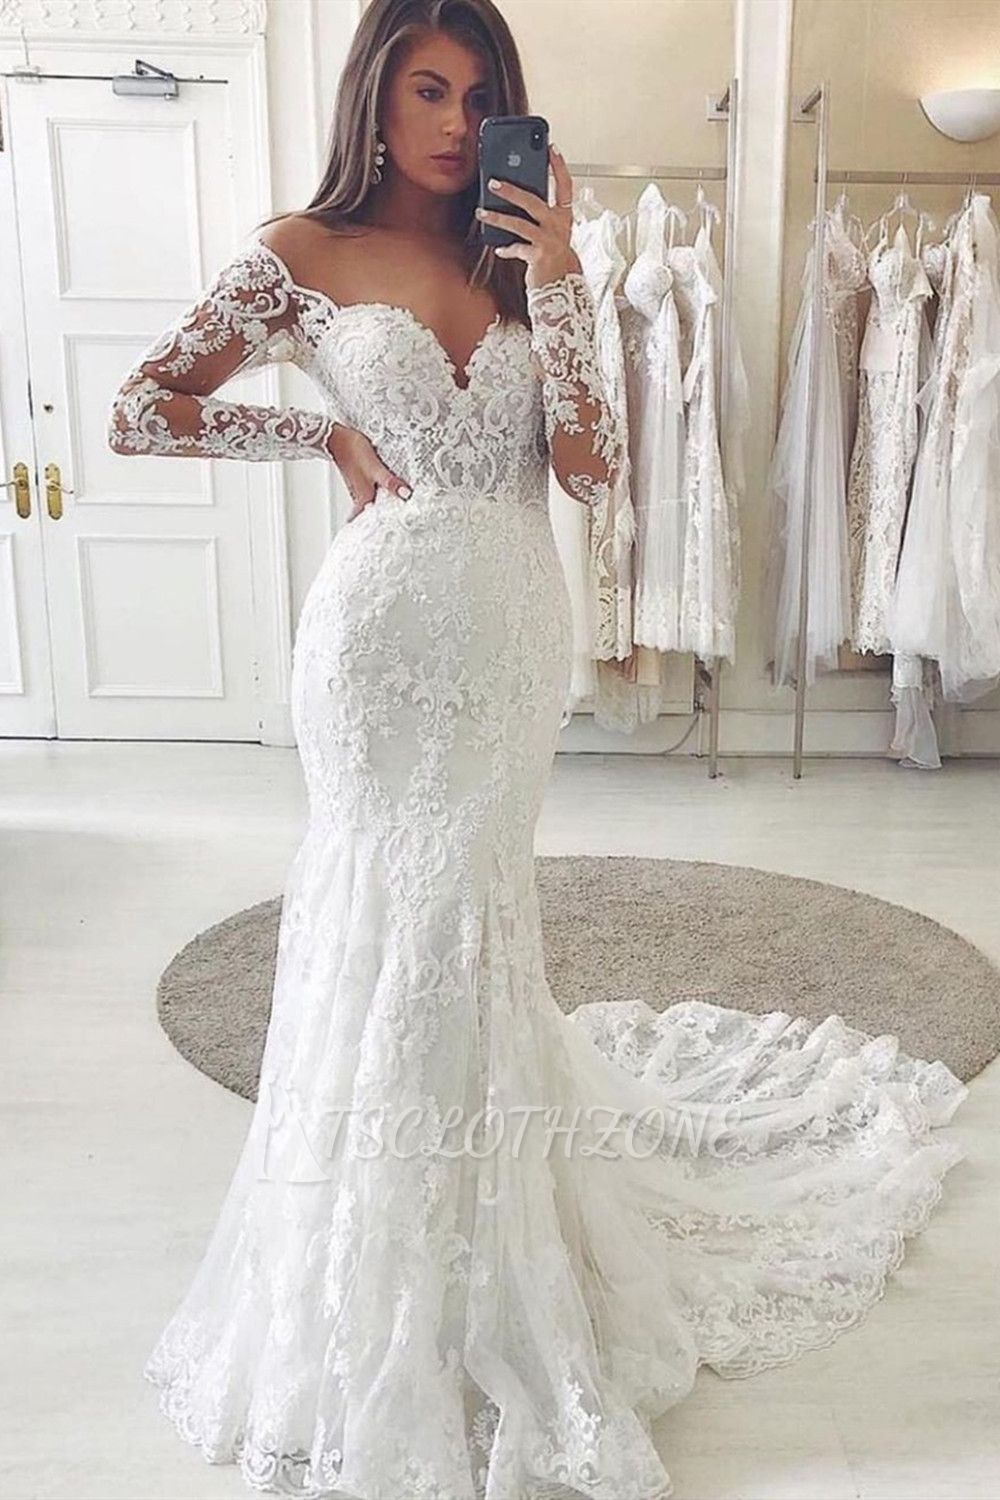 Charming Lace Appliques Mermaid Wedding Gown Long Sleeve Sweetheart Bridal Dress